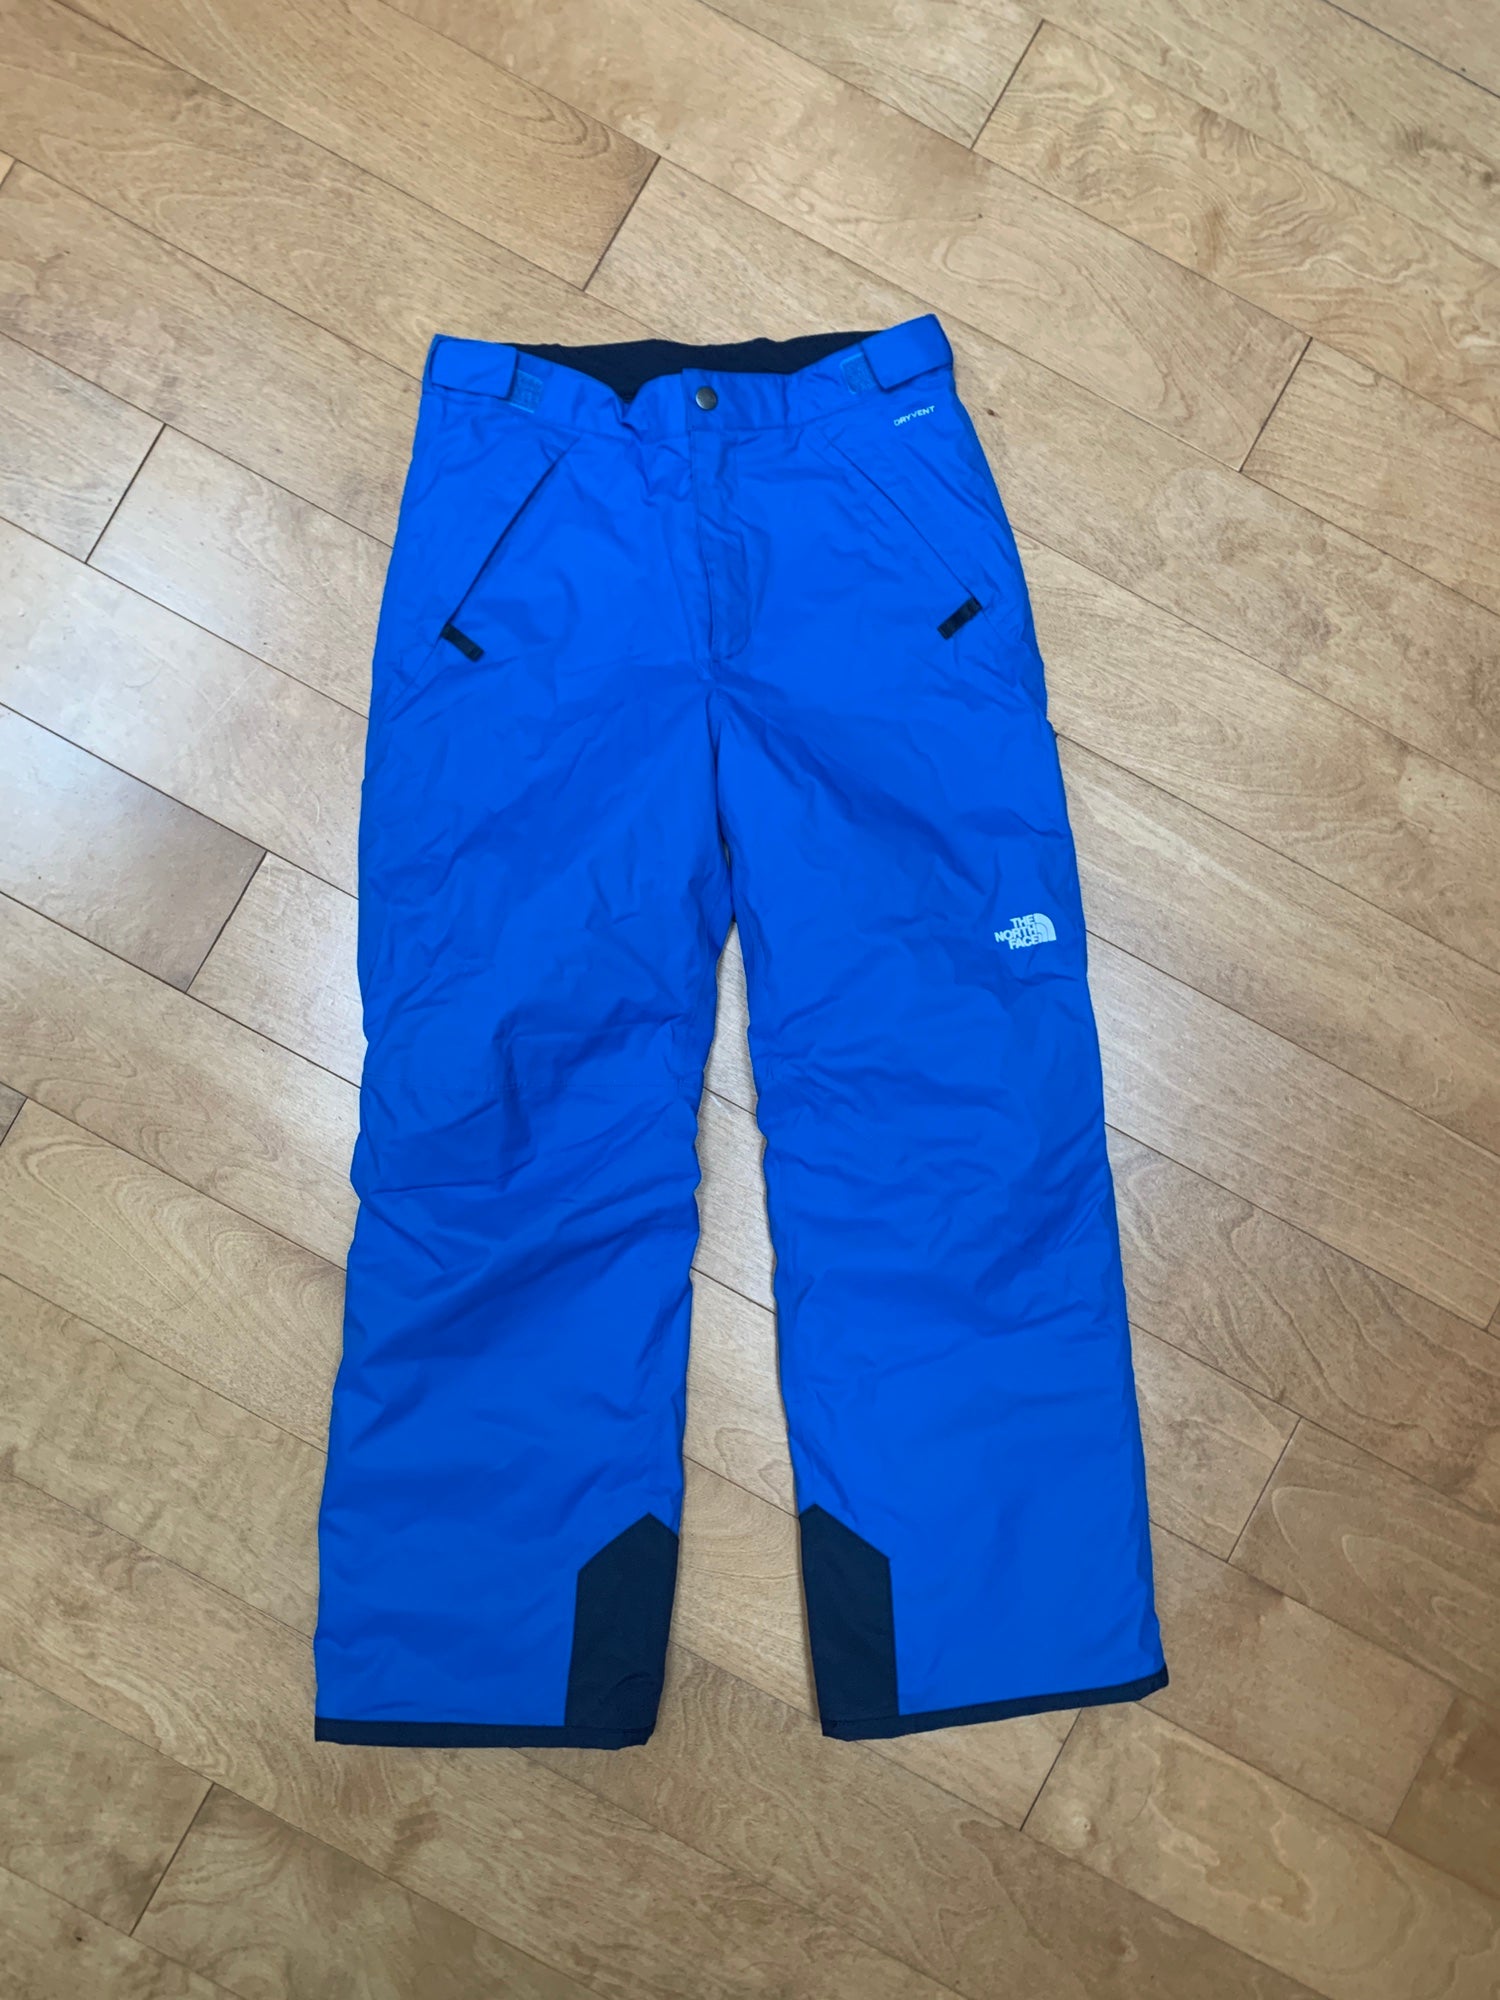 Boys' Freedom Insulated Pant